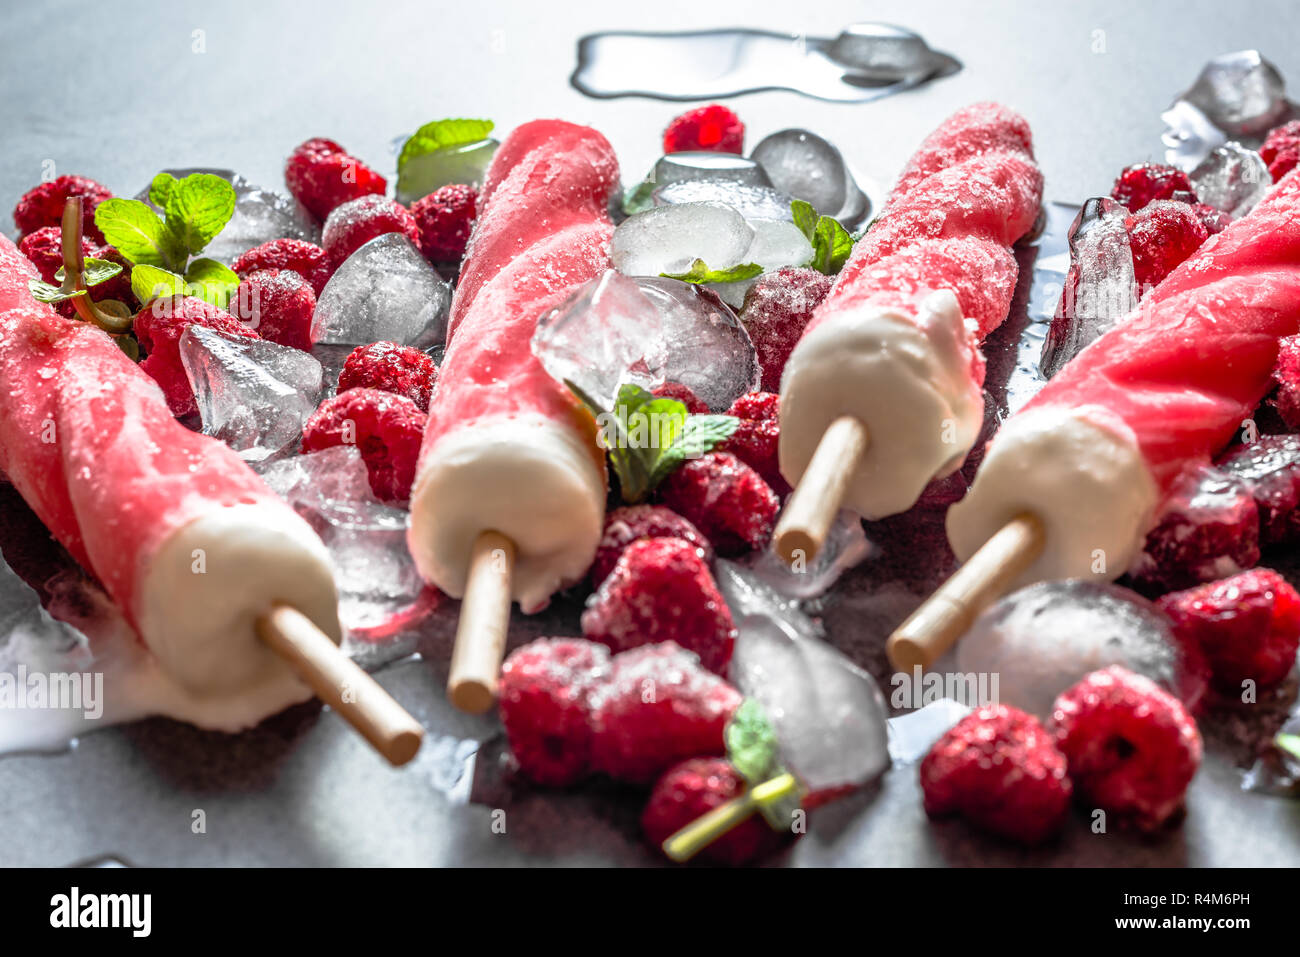 Flavored ice popsicles with frozen fruits, cold refreshing snack for summer Stock Photo